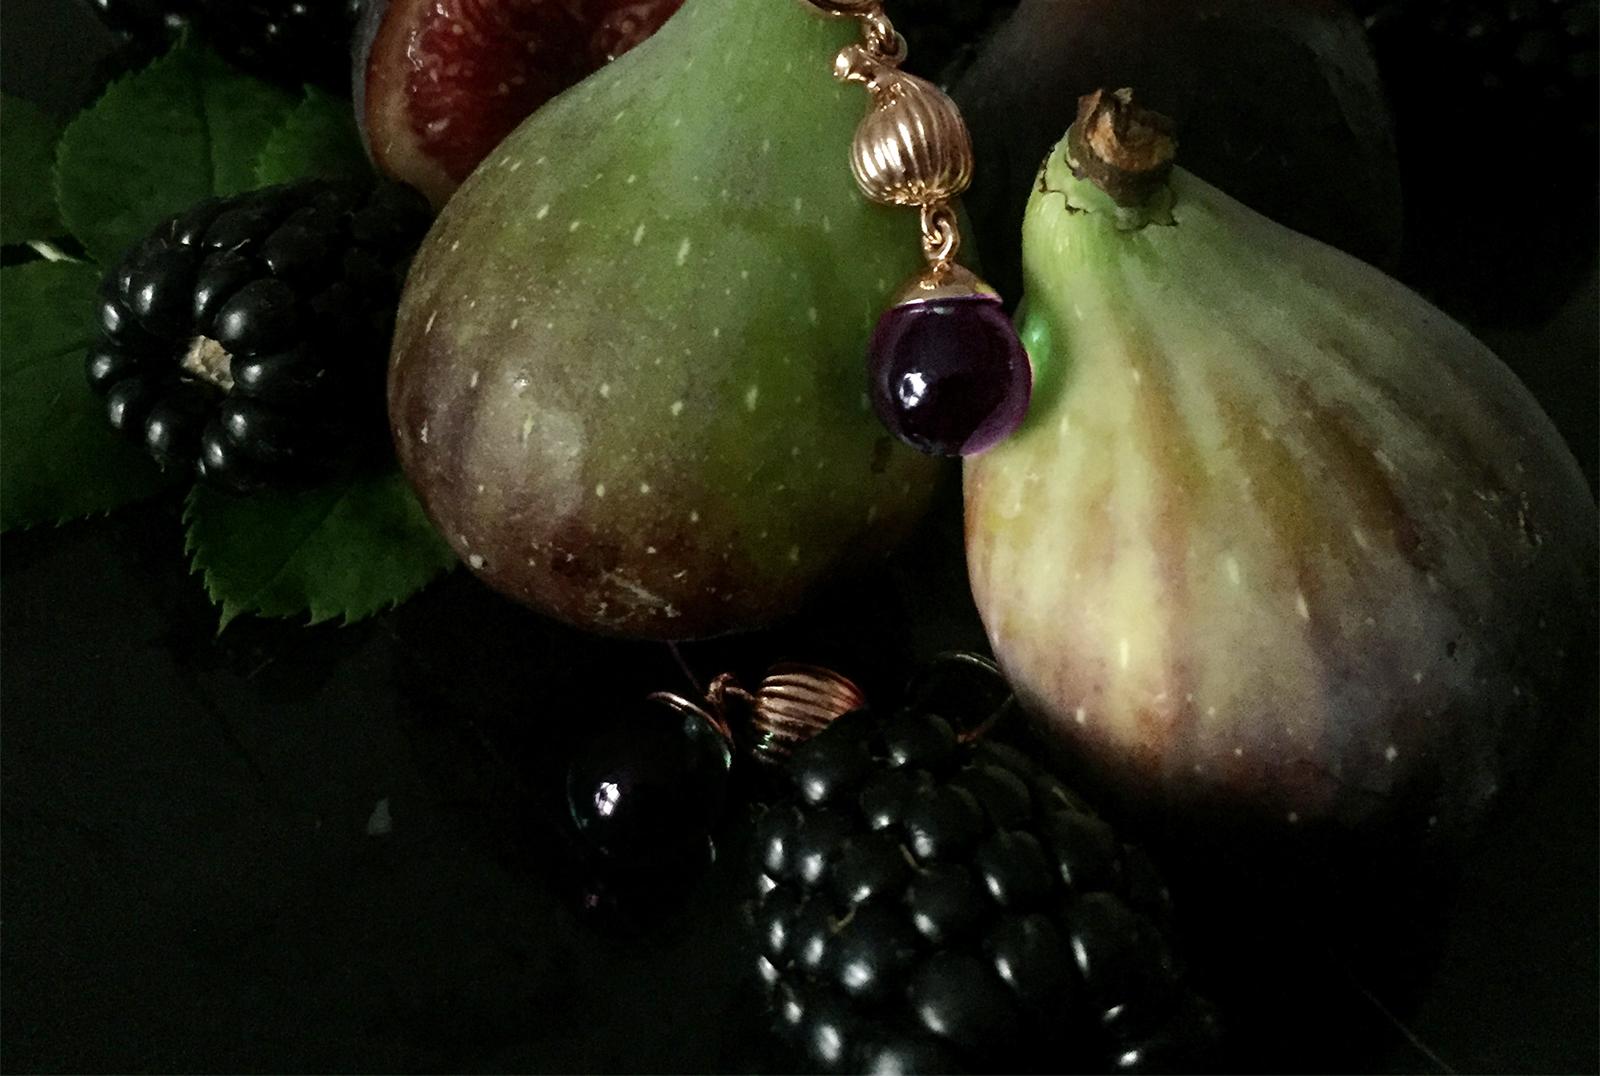 This 18 karat yellow gold Fig drop pendant necklace features a detachable cabochon amethyst and has been featured in Vogue UA. The gem drop is designed to allow for optimal light exposure.

The collection was inspired by the sweet and fresh notes of